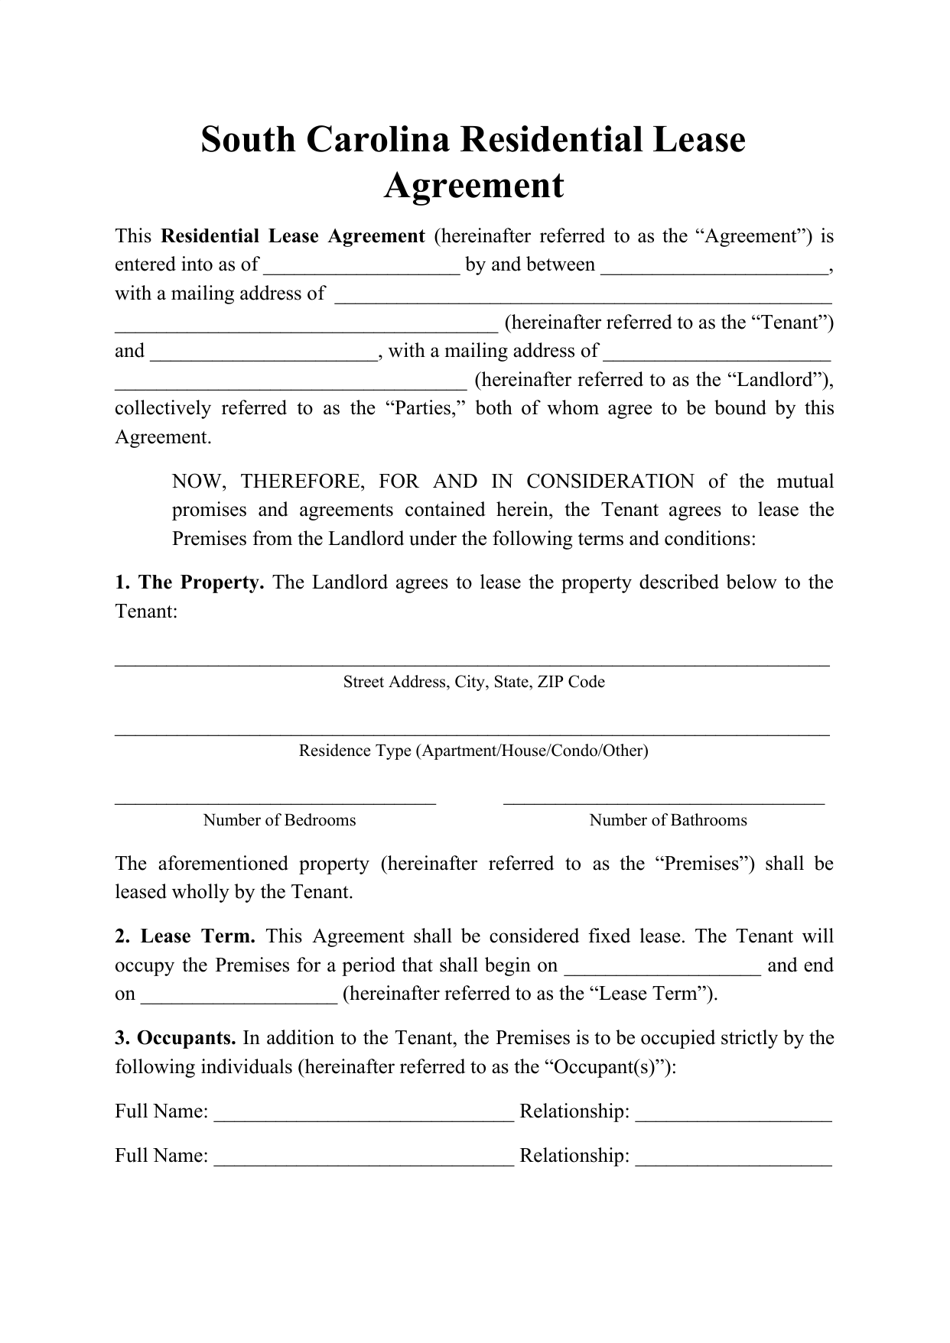 Residential Lease Agreement Template - South Carolina, Page 1